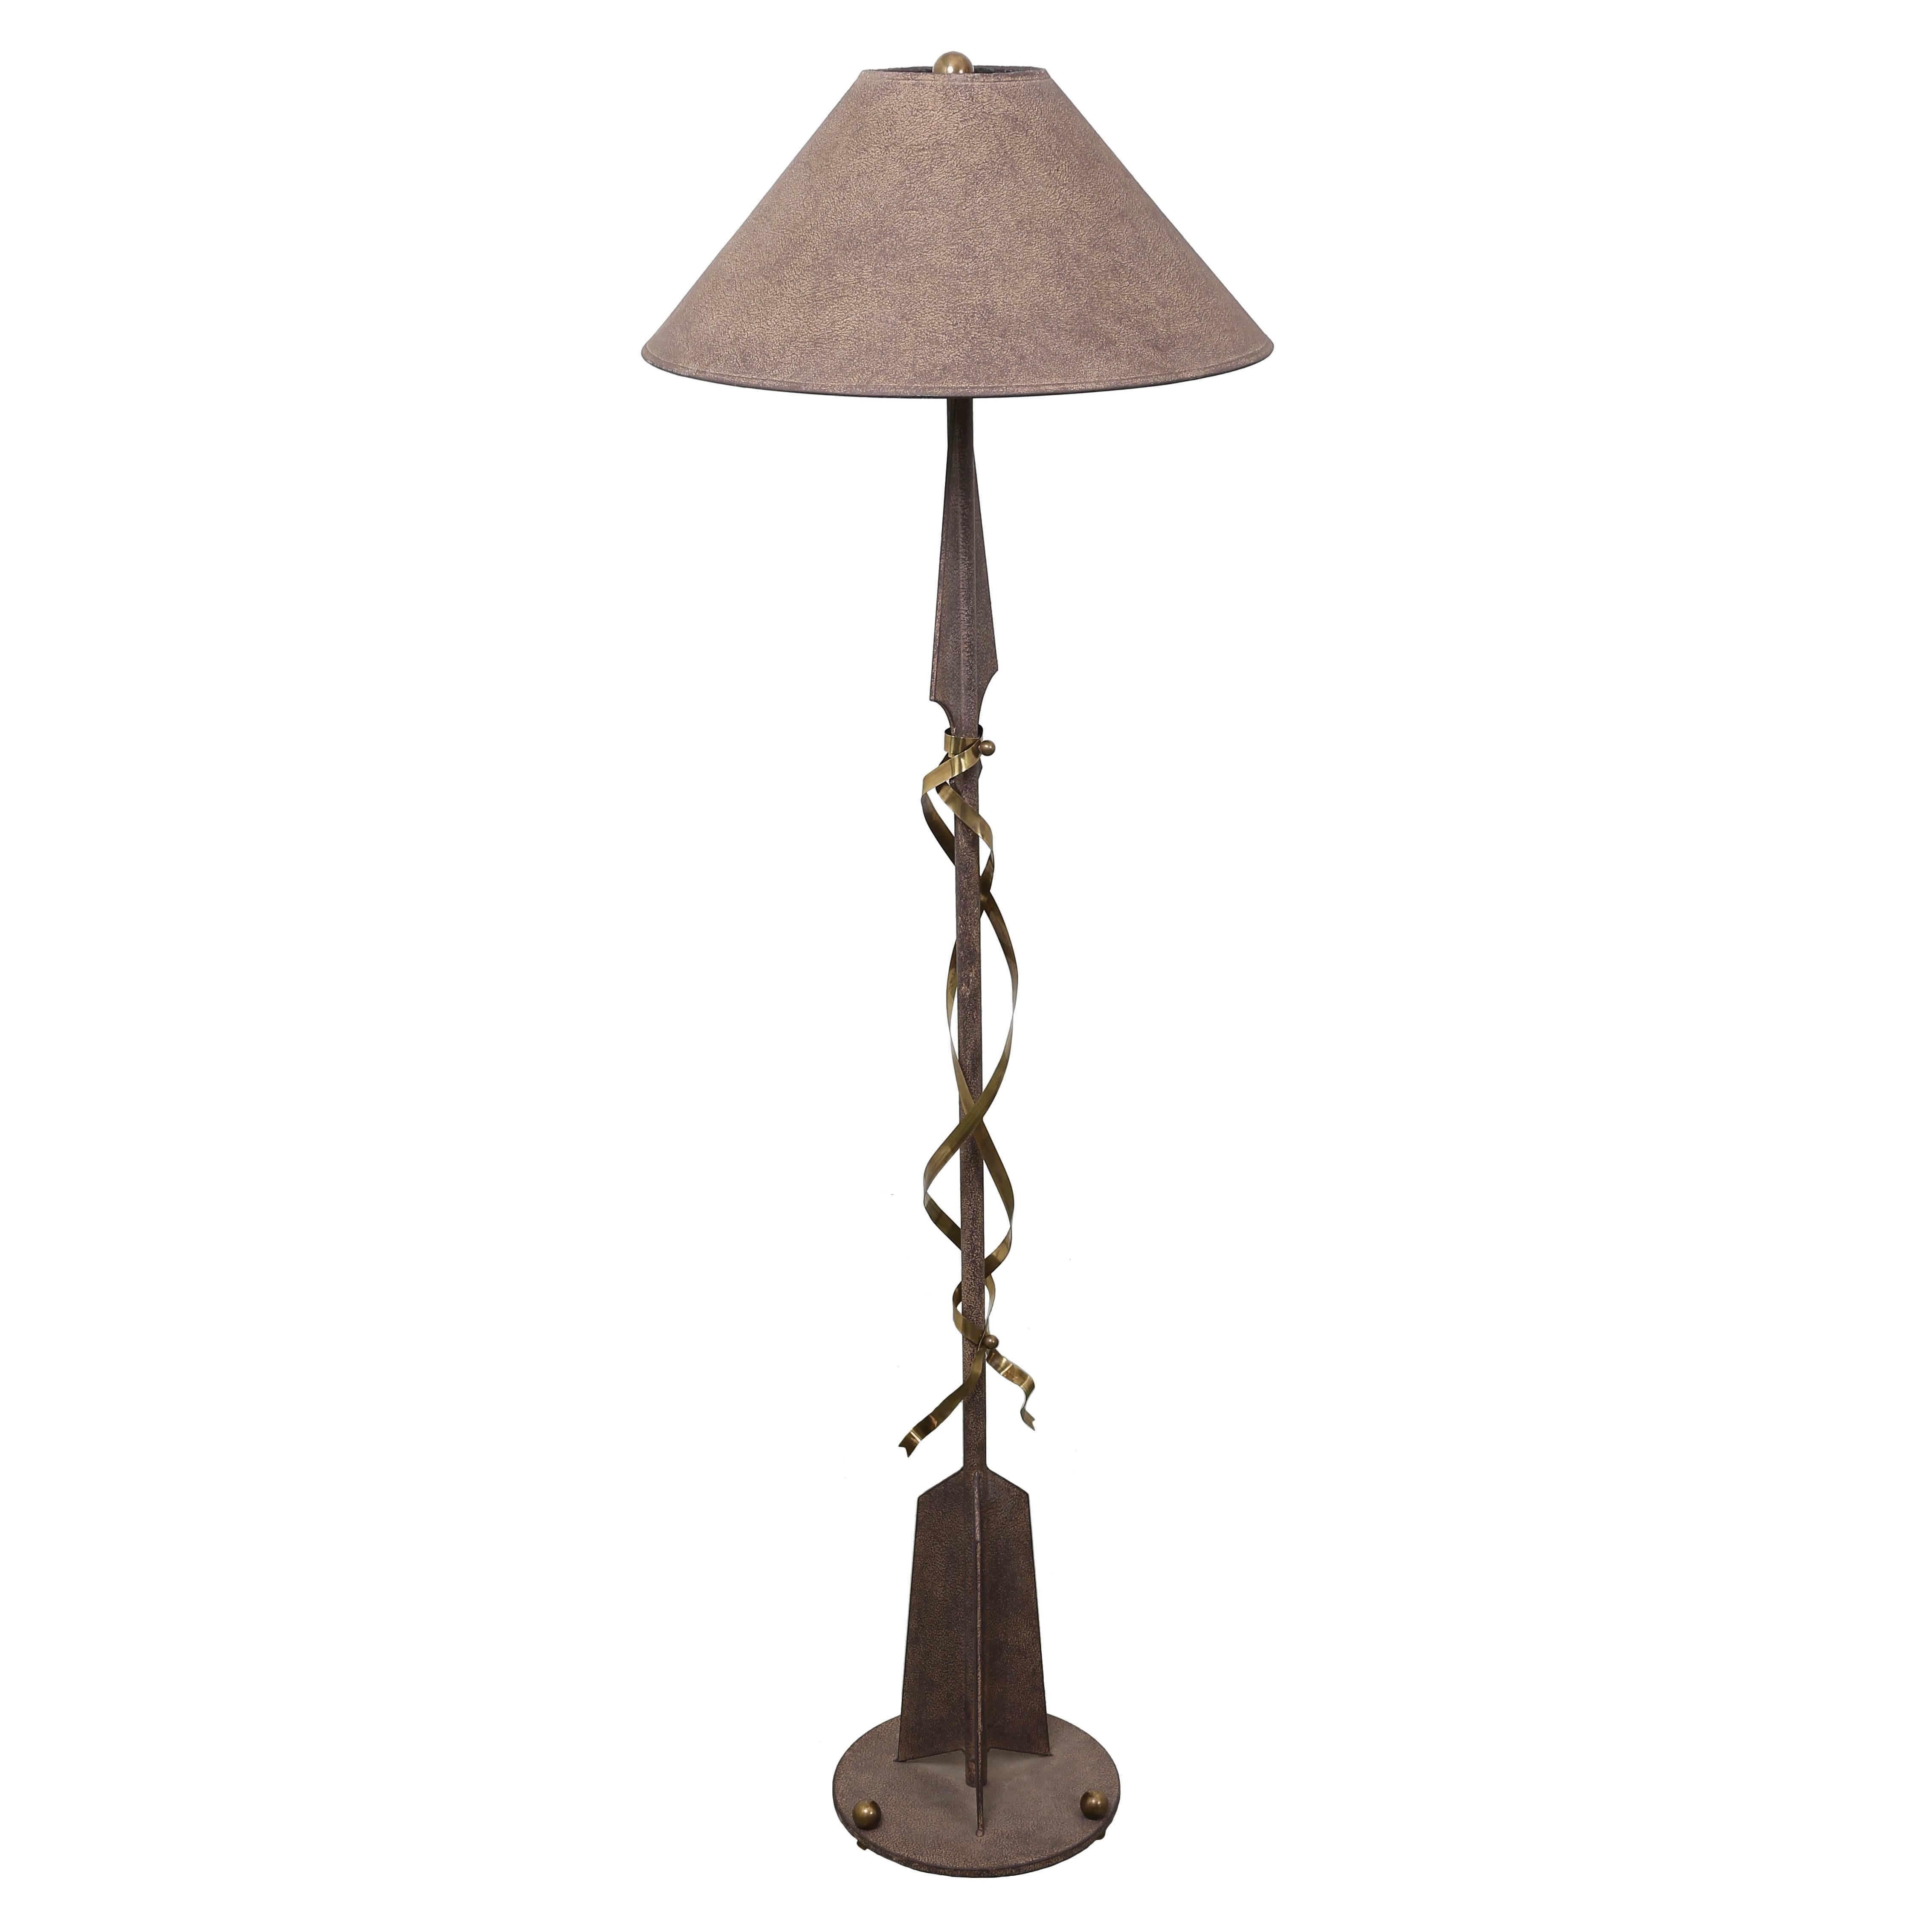  Gilbert Poillerat Style Parchment & Brass Arrow Floor Lamp by Hart Asso. For Sale